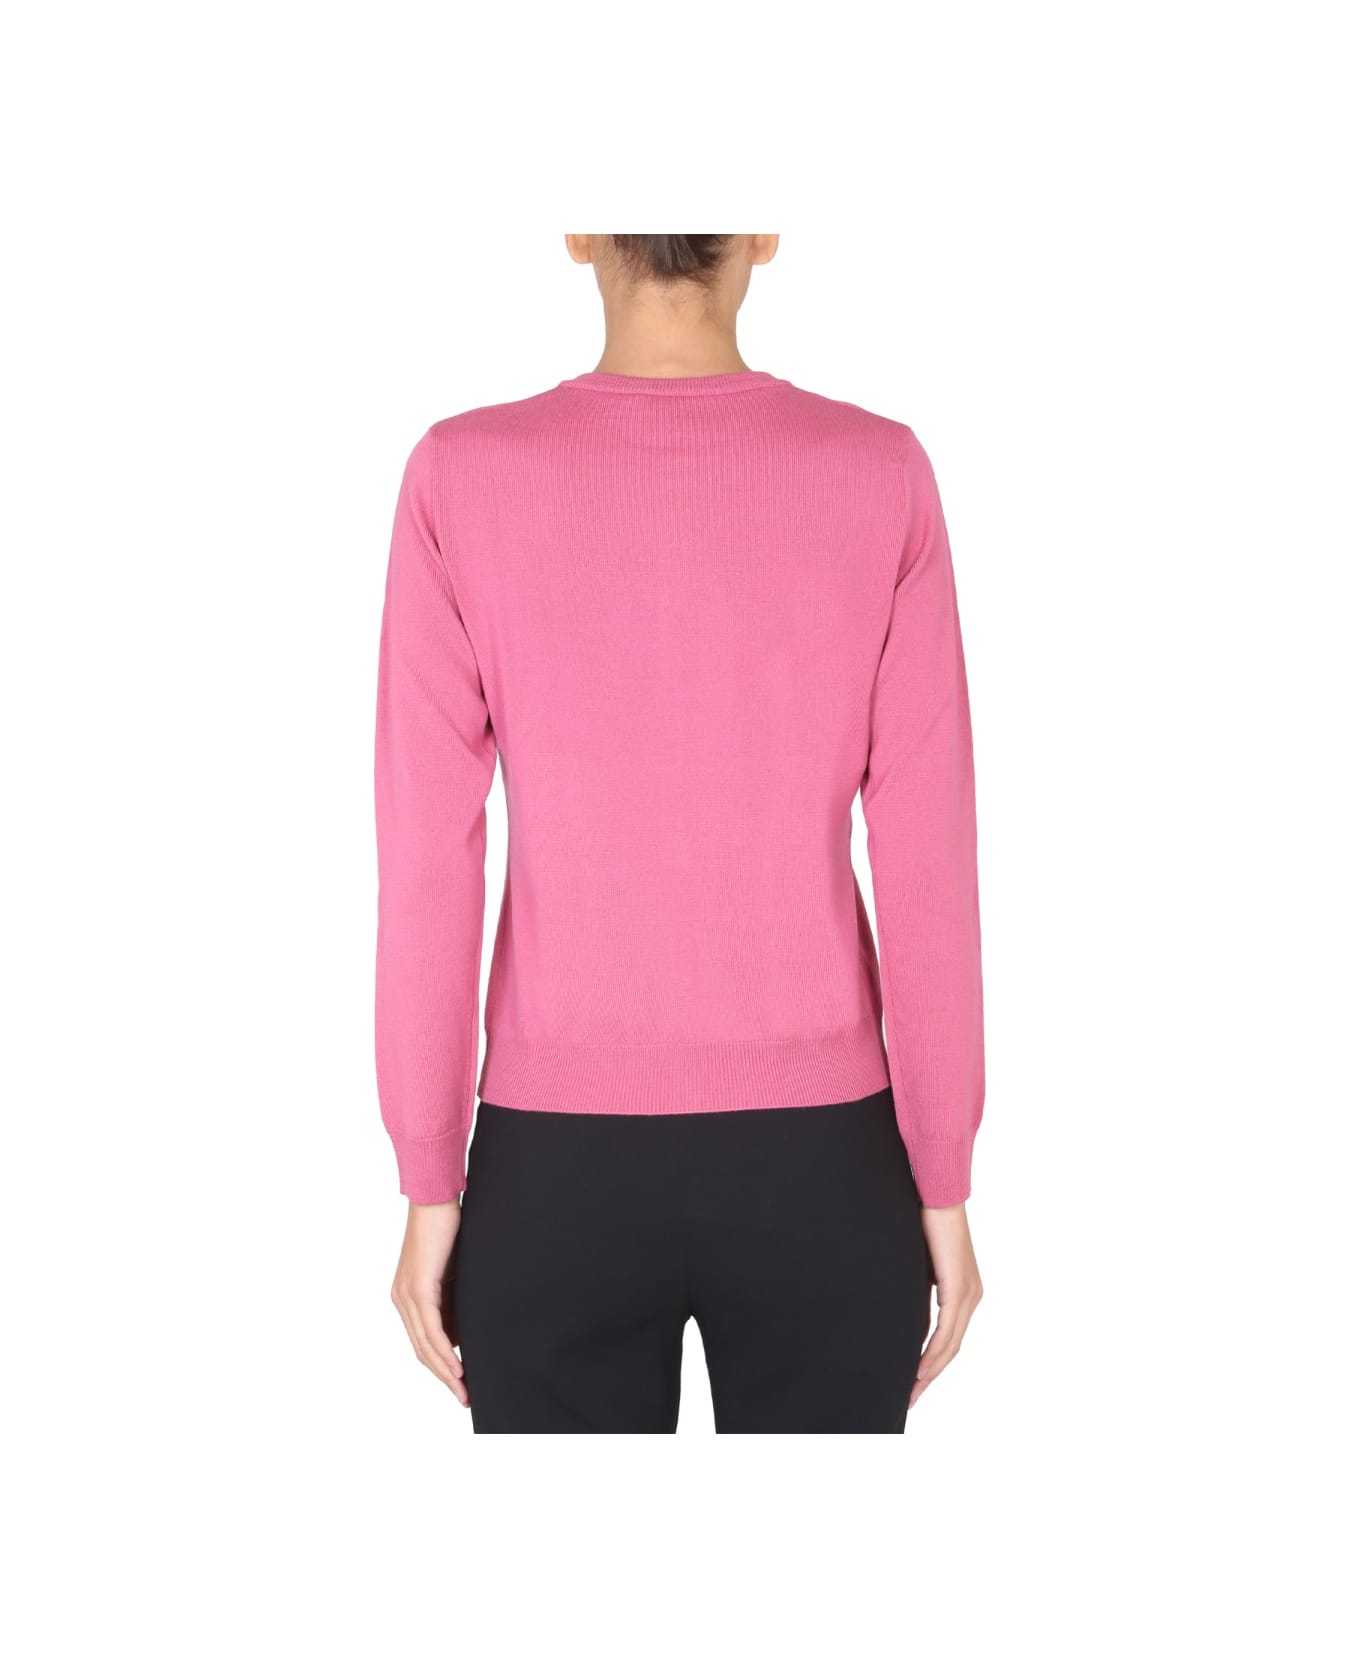 Boutique Moschino Wool Jersey. - PINK